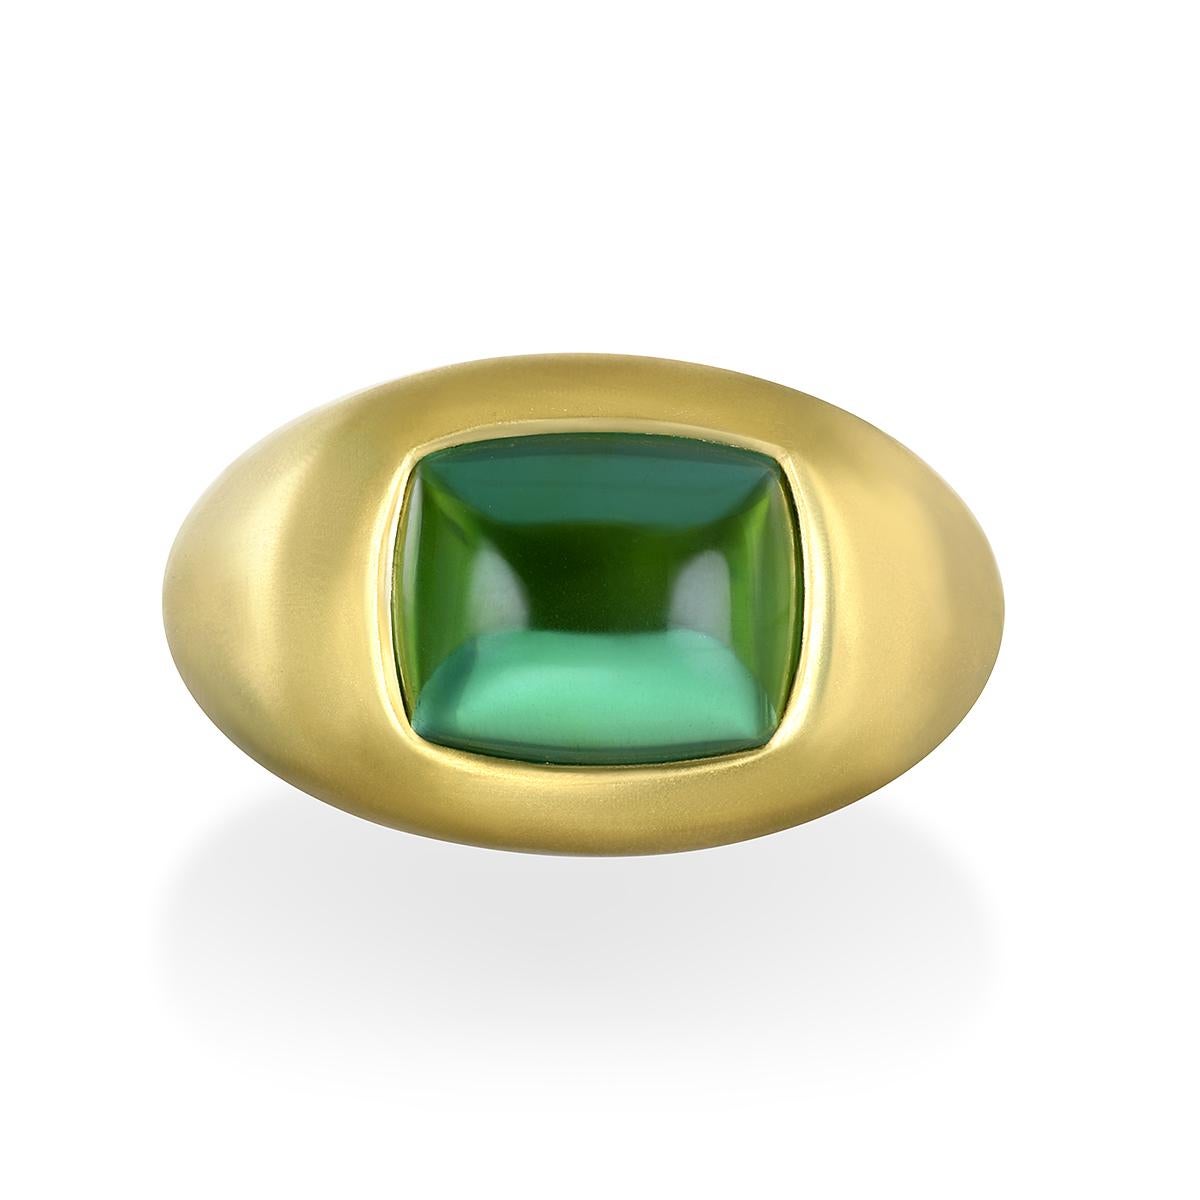 Faye Kim's 18 Karat Gold Cushion Green Tourmaline Cabochon Ring, with its mesmerizing green hue and dome setting, is beautifully is matte finished and can be worn for any occasion. 

Green Tourmaline Cabachon 5.78 Carats
Cabochon dimensions 11 x